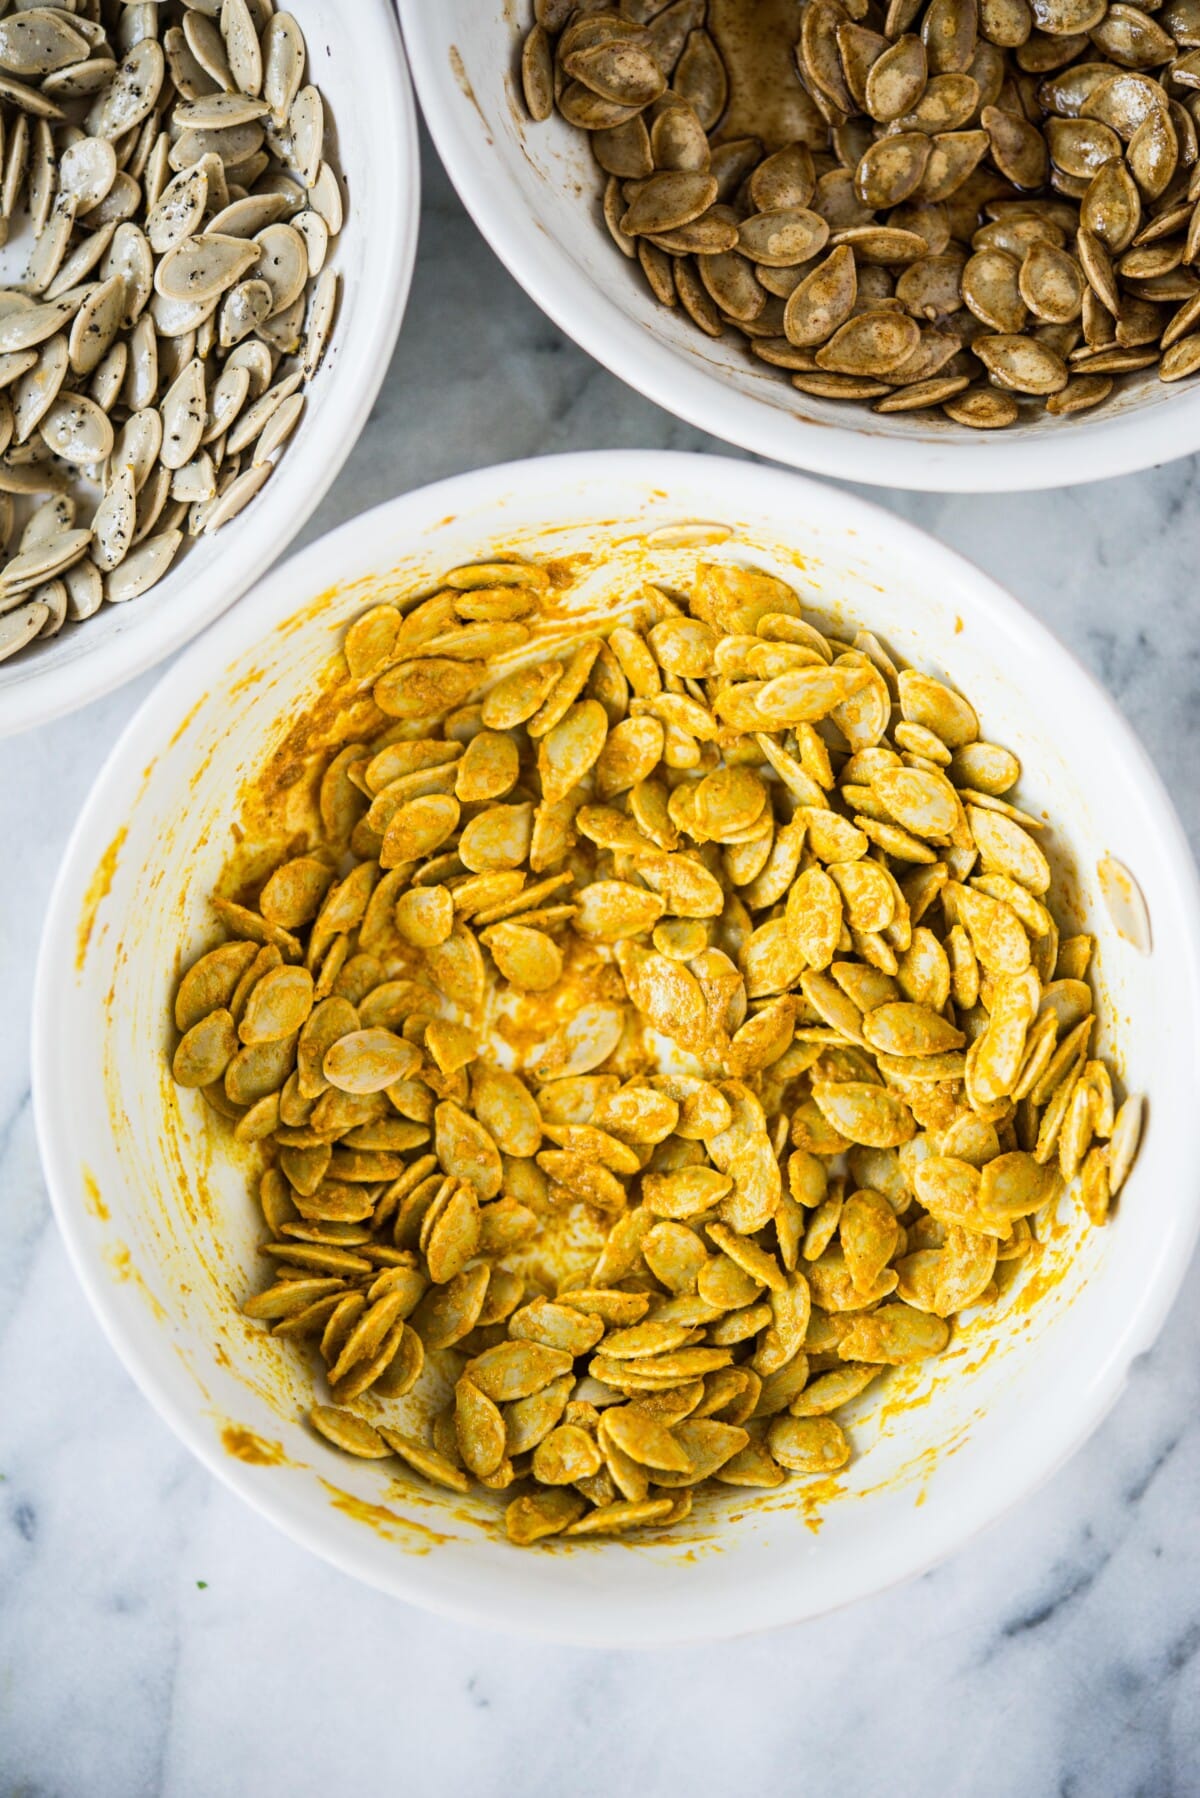 homemade pumpkin seeds tossed in curry seasoning in a white bowl